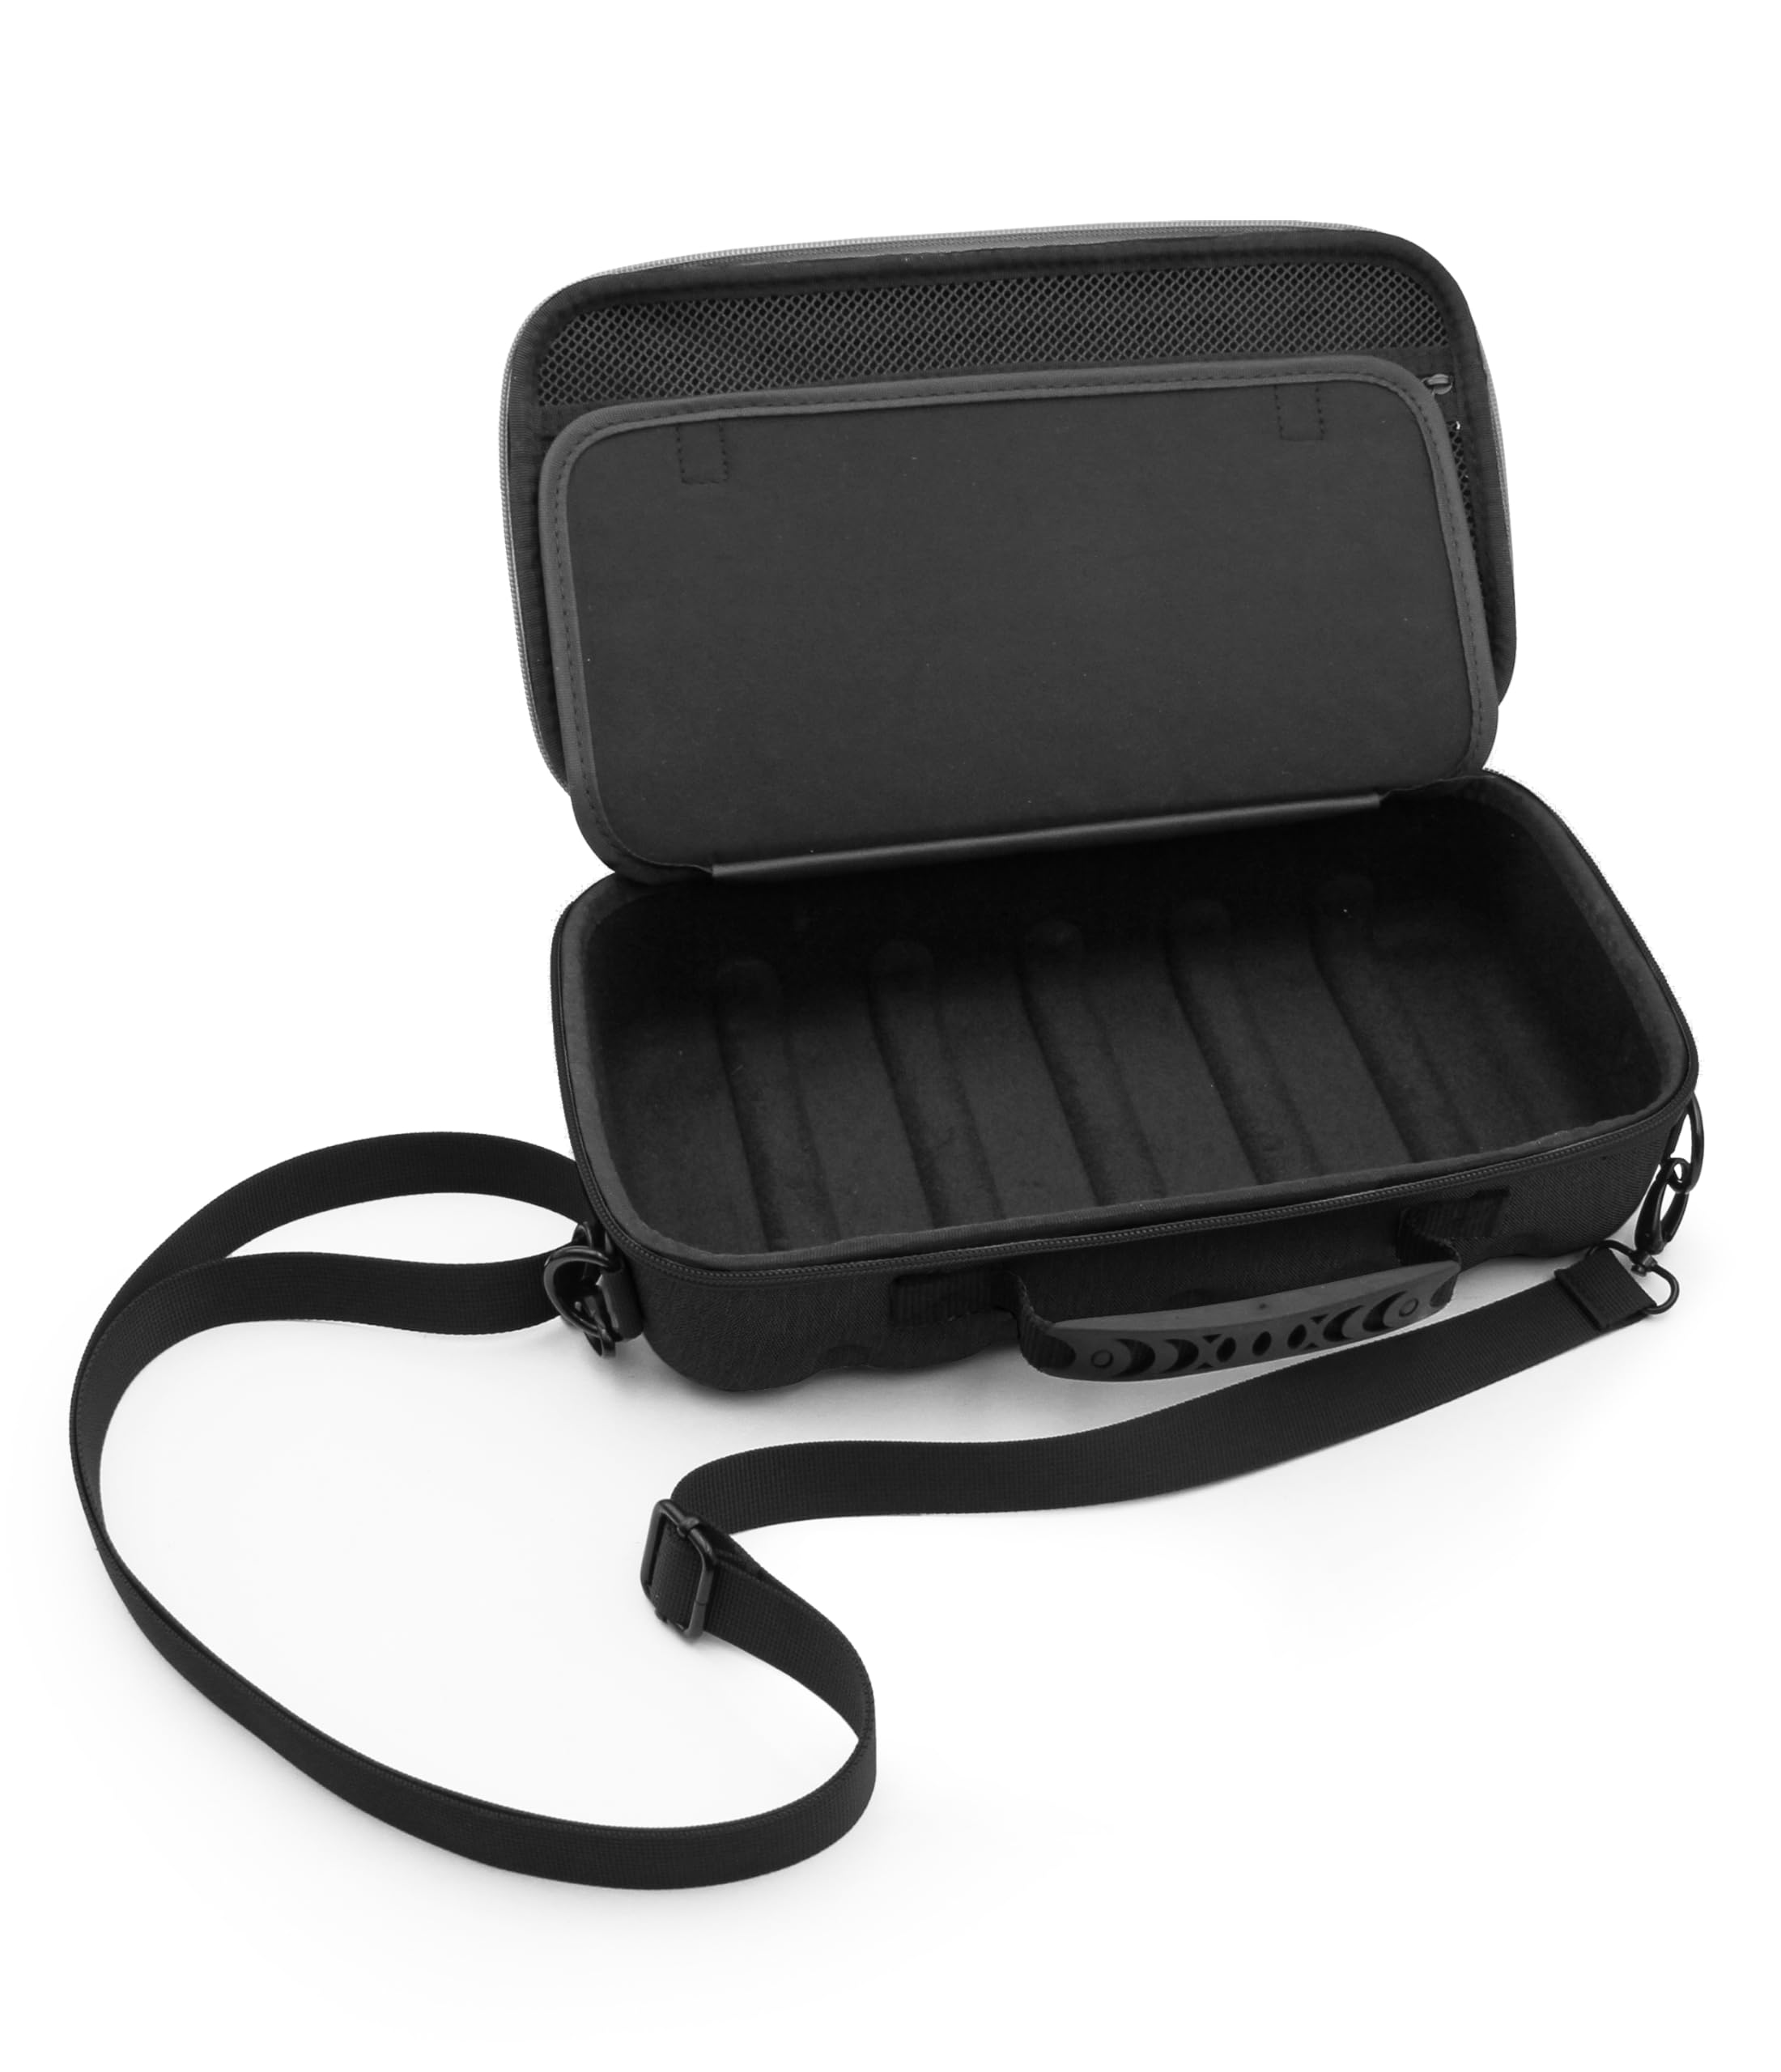 CASEMATIX Travel Case Compatible with Audio-technica AT-SB727 Portable Turntable Sound Burger Vinyl Record Player - Includes Carry Case Only with Handle and Shoulder Strap, Black